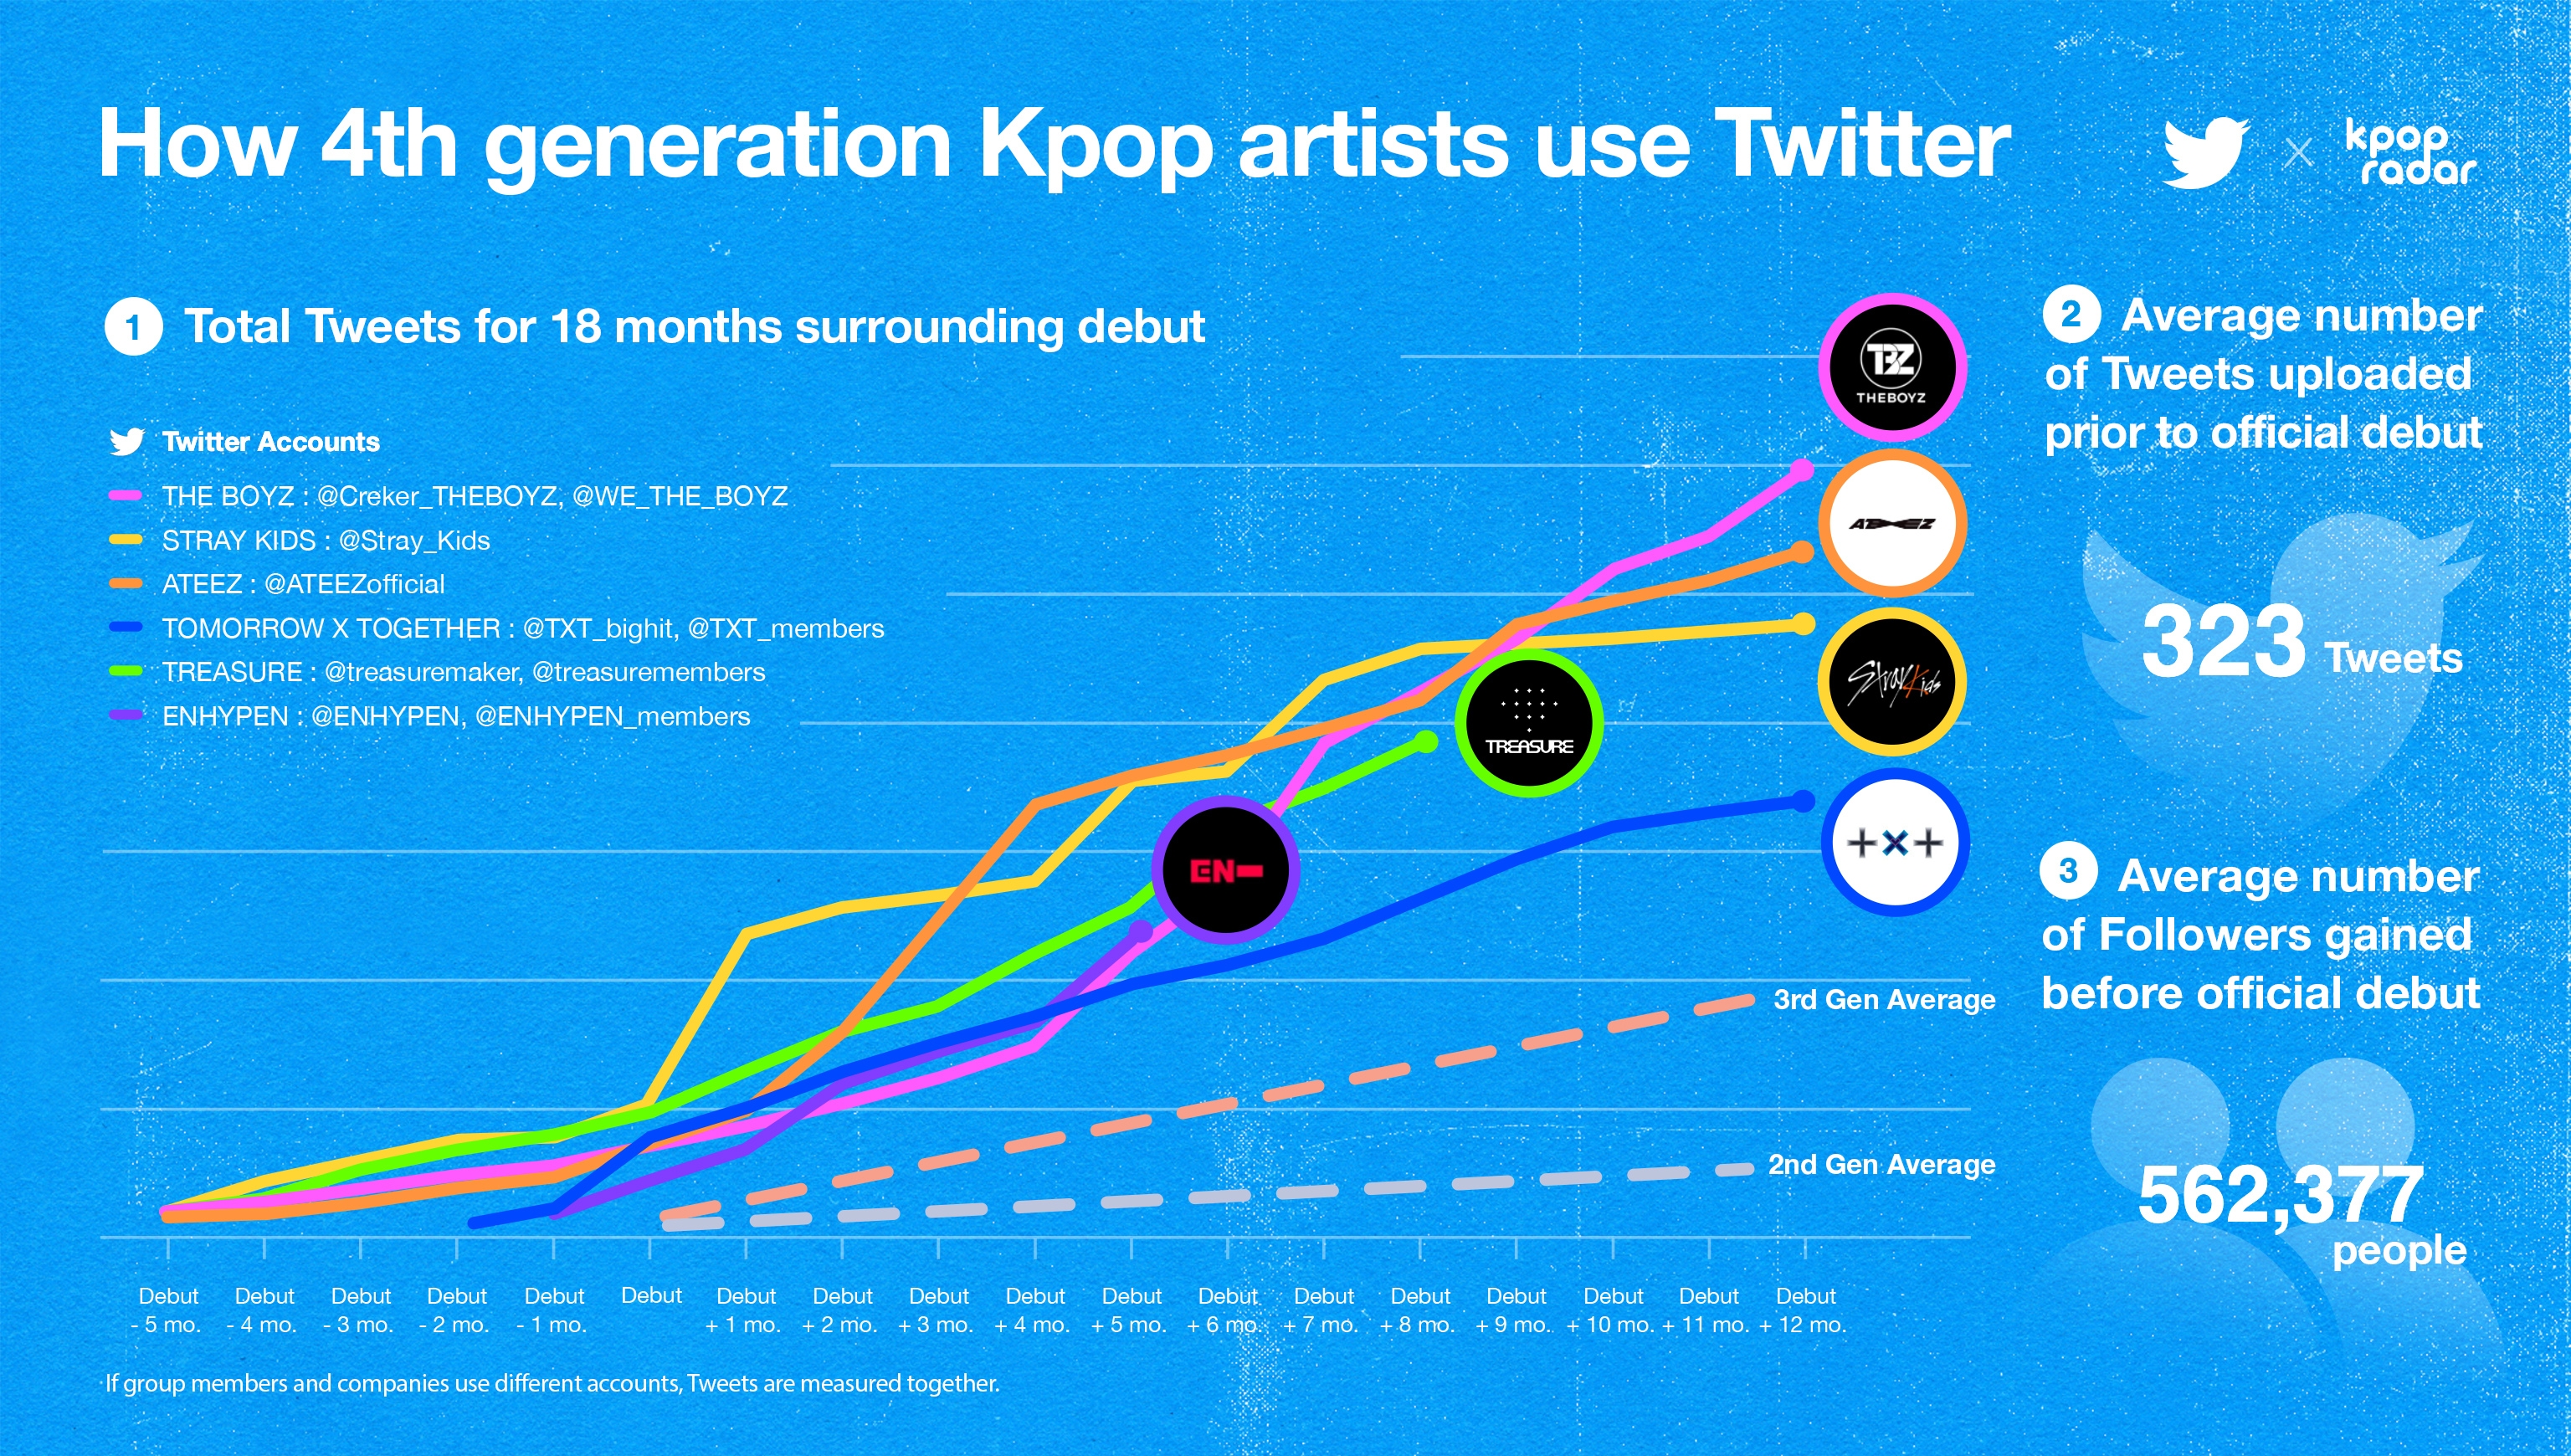 Kpop Generation Analysis: BTS set an example for the 4th gen on